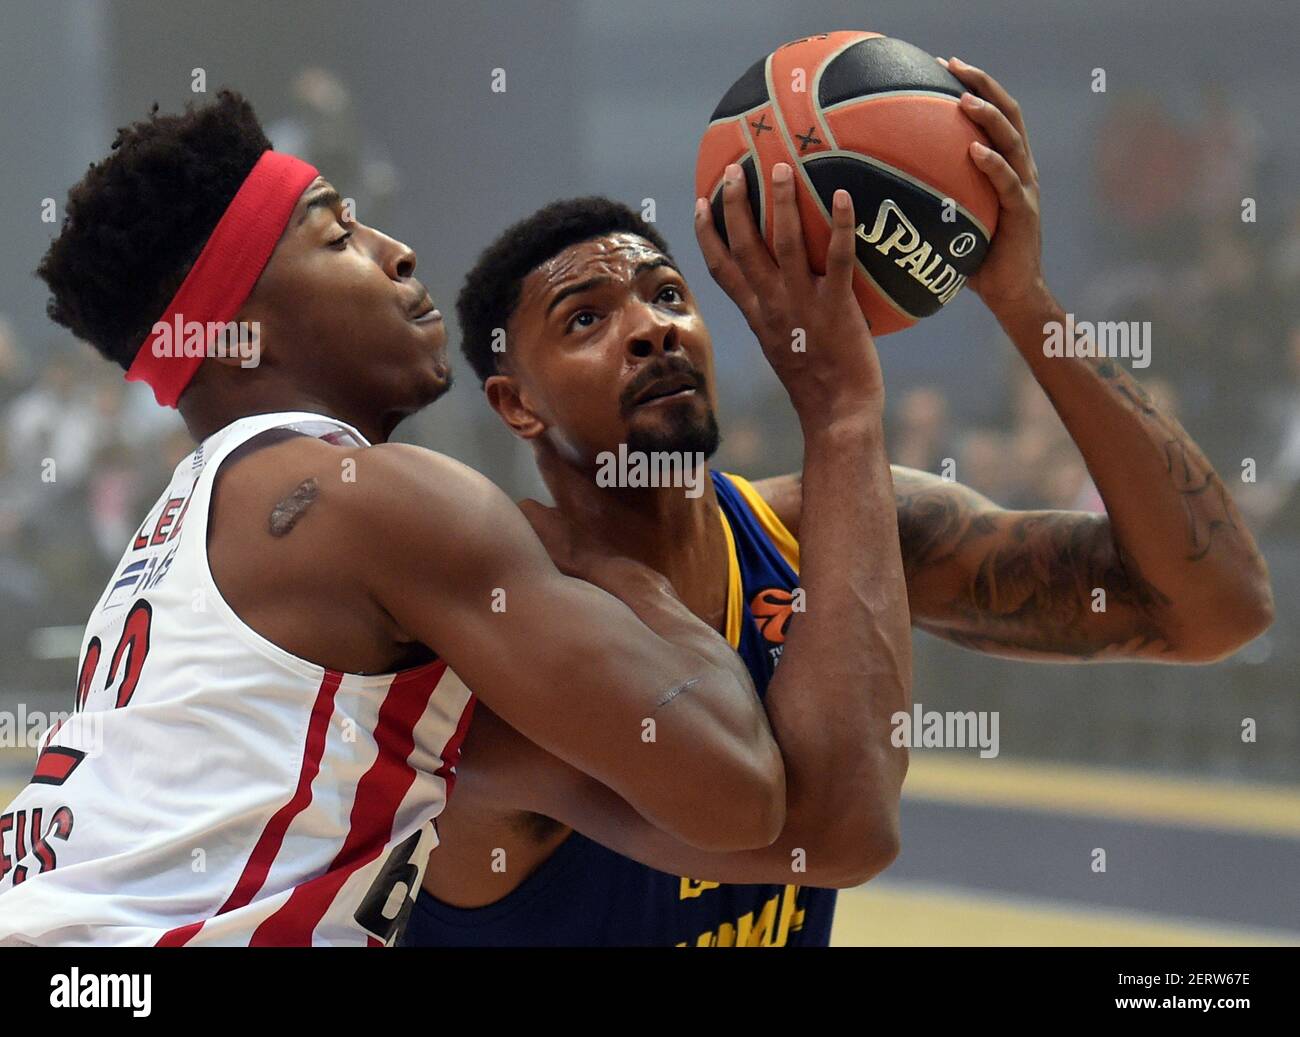 Euroleague Basketball. The match between Khimki (Russia, Khimki) and  Olympiakos (Greece, Piraeus) was held in the sports complex Arena-Mytischi.  Charles Jenkins of Khimki (right) and Zack Ledey of Olympiacos (left)  during the